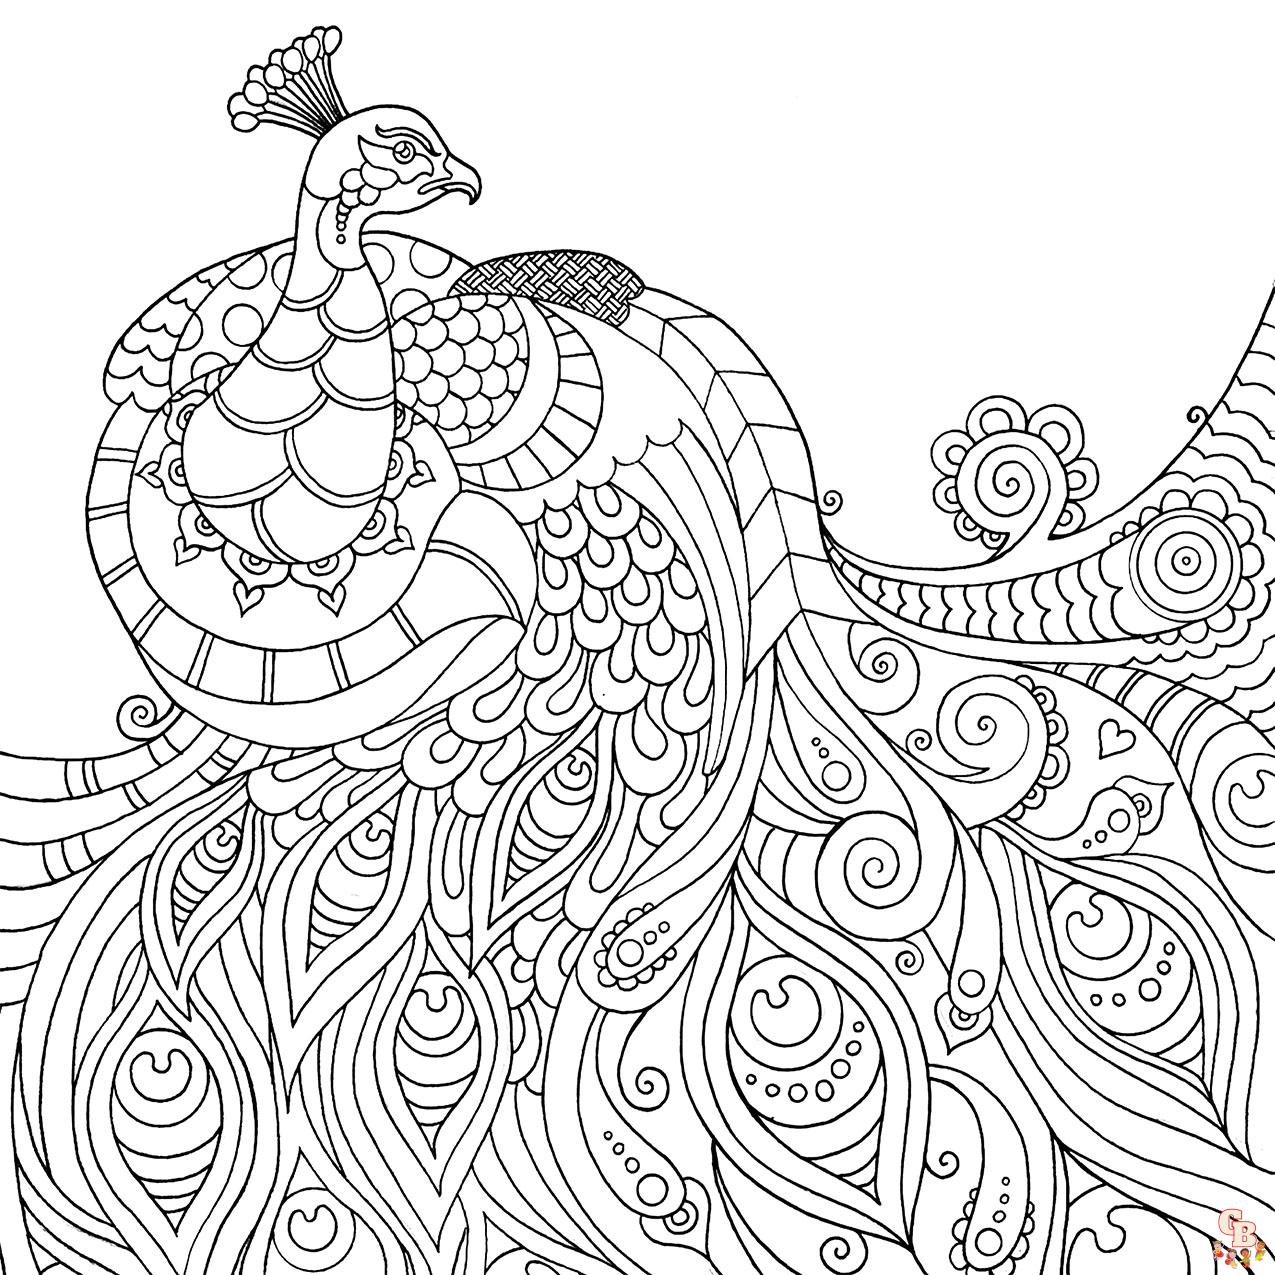 Mindfulness Coloring Pages 6